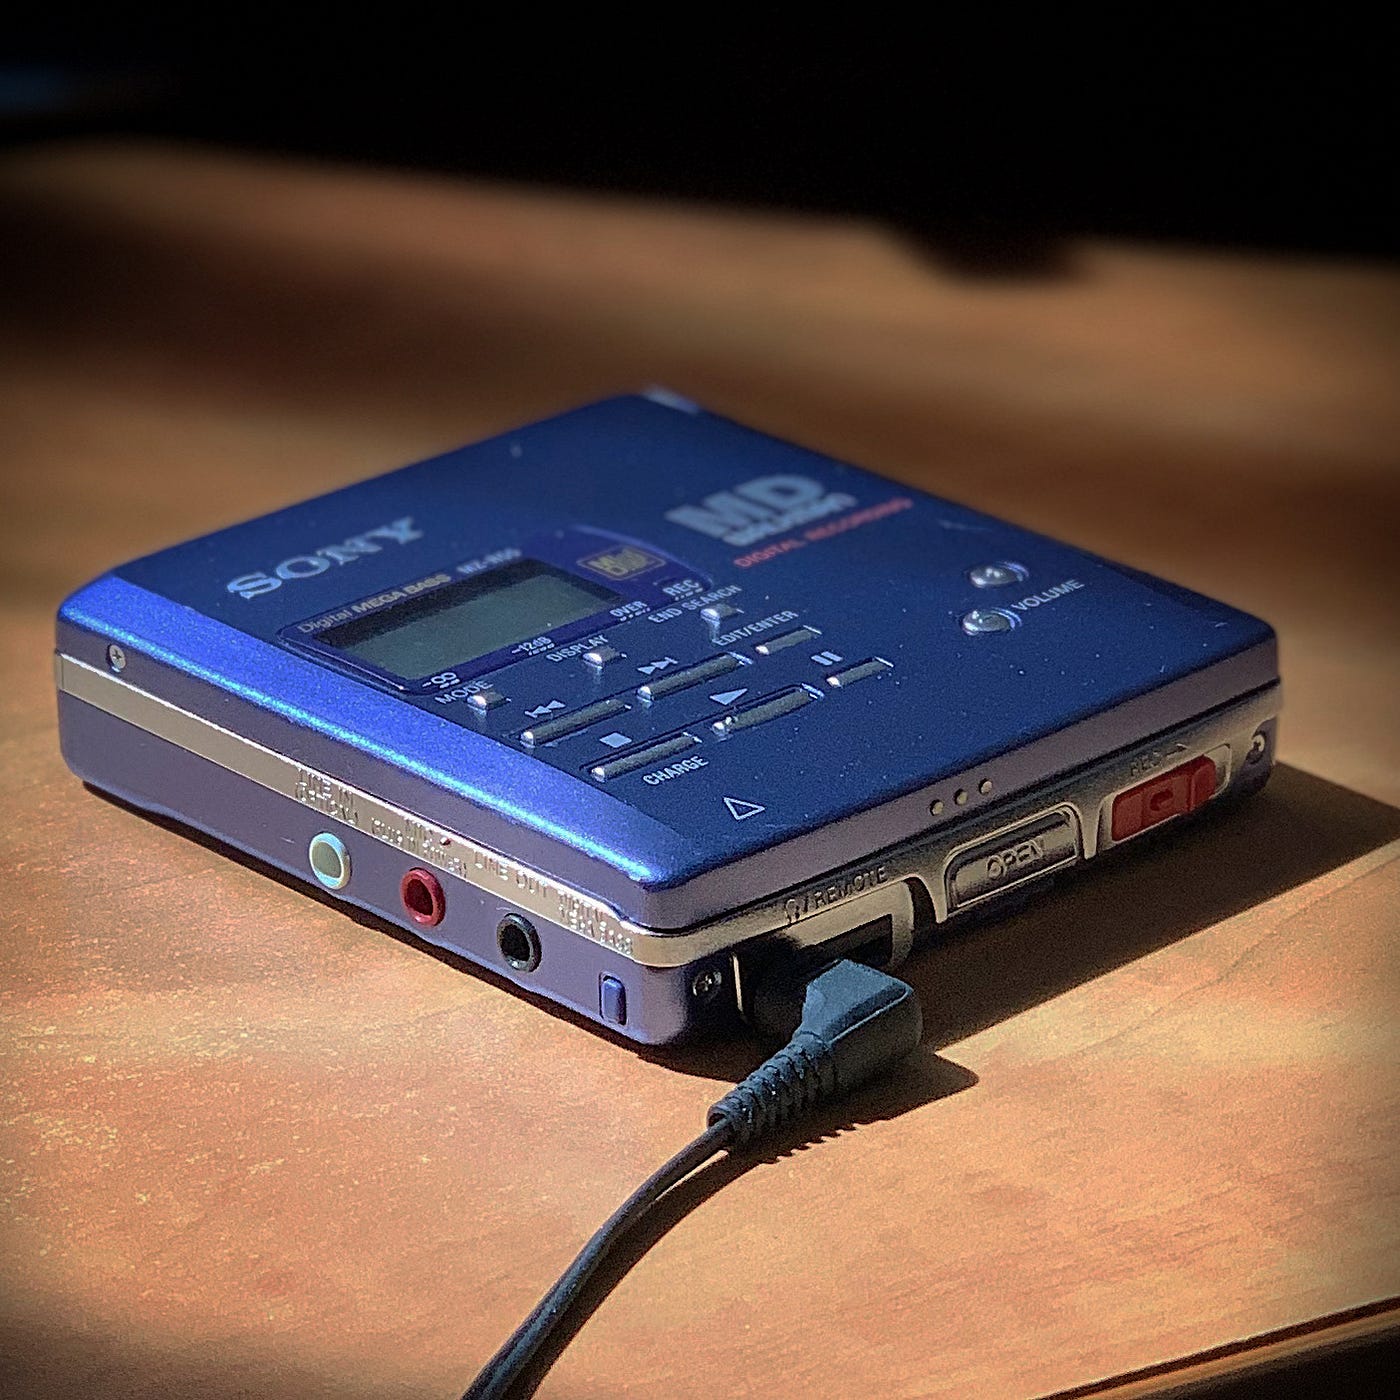 MiniDisc: Retro to the Future. “Hey, is that a MiniDisc player?” asked… |  by Michael Yan | Medium